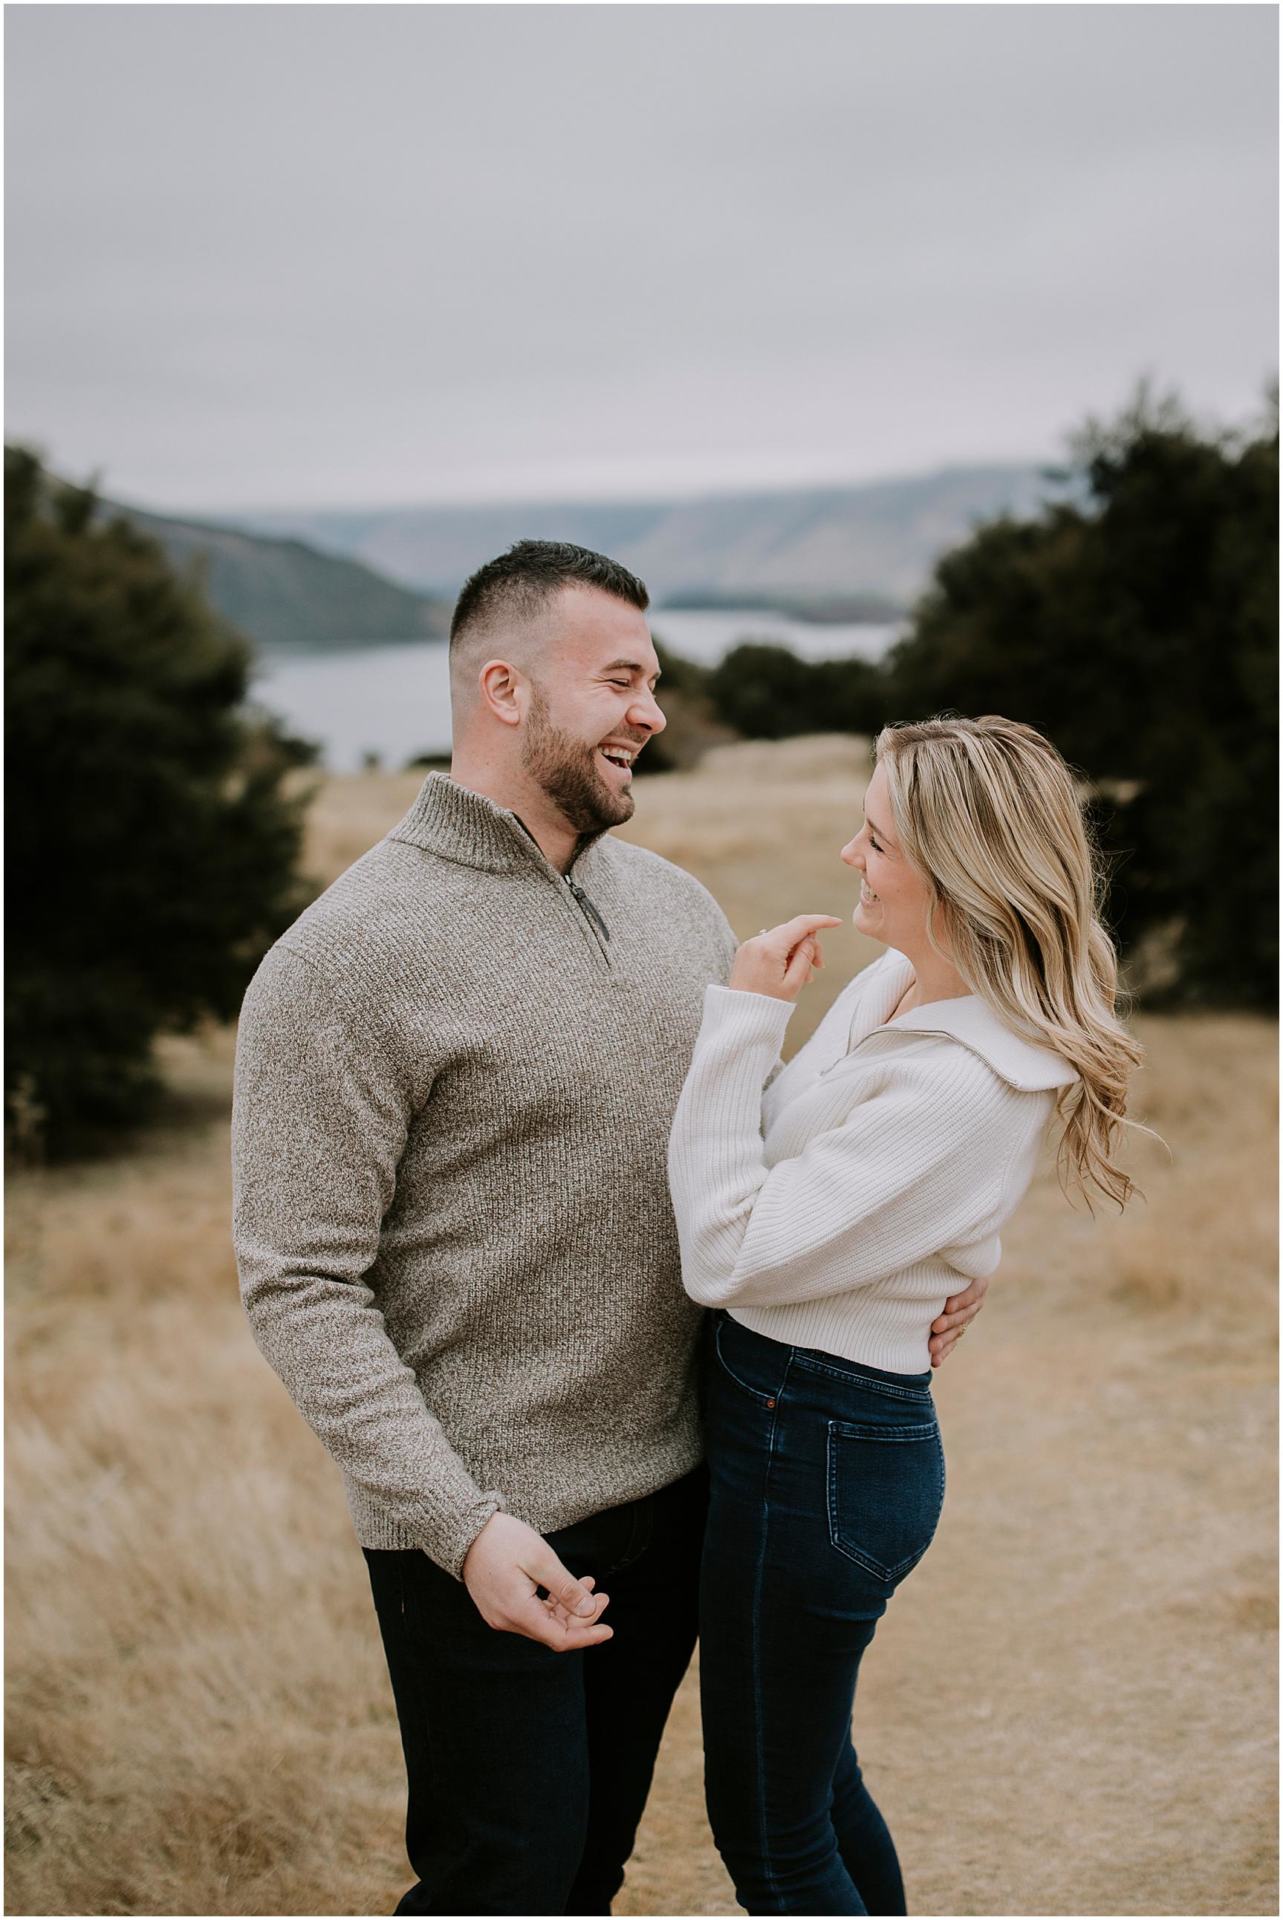 Charlotte Kiri Photography - Engagement Photography with a joyous couple embracing and laughing whilst admiring one another, in front of picturesque scenery of trees, lakes and mountains in Matakauri Lodge, Queenstown, New Zealand